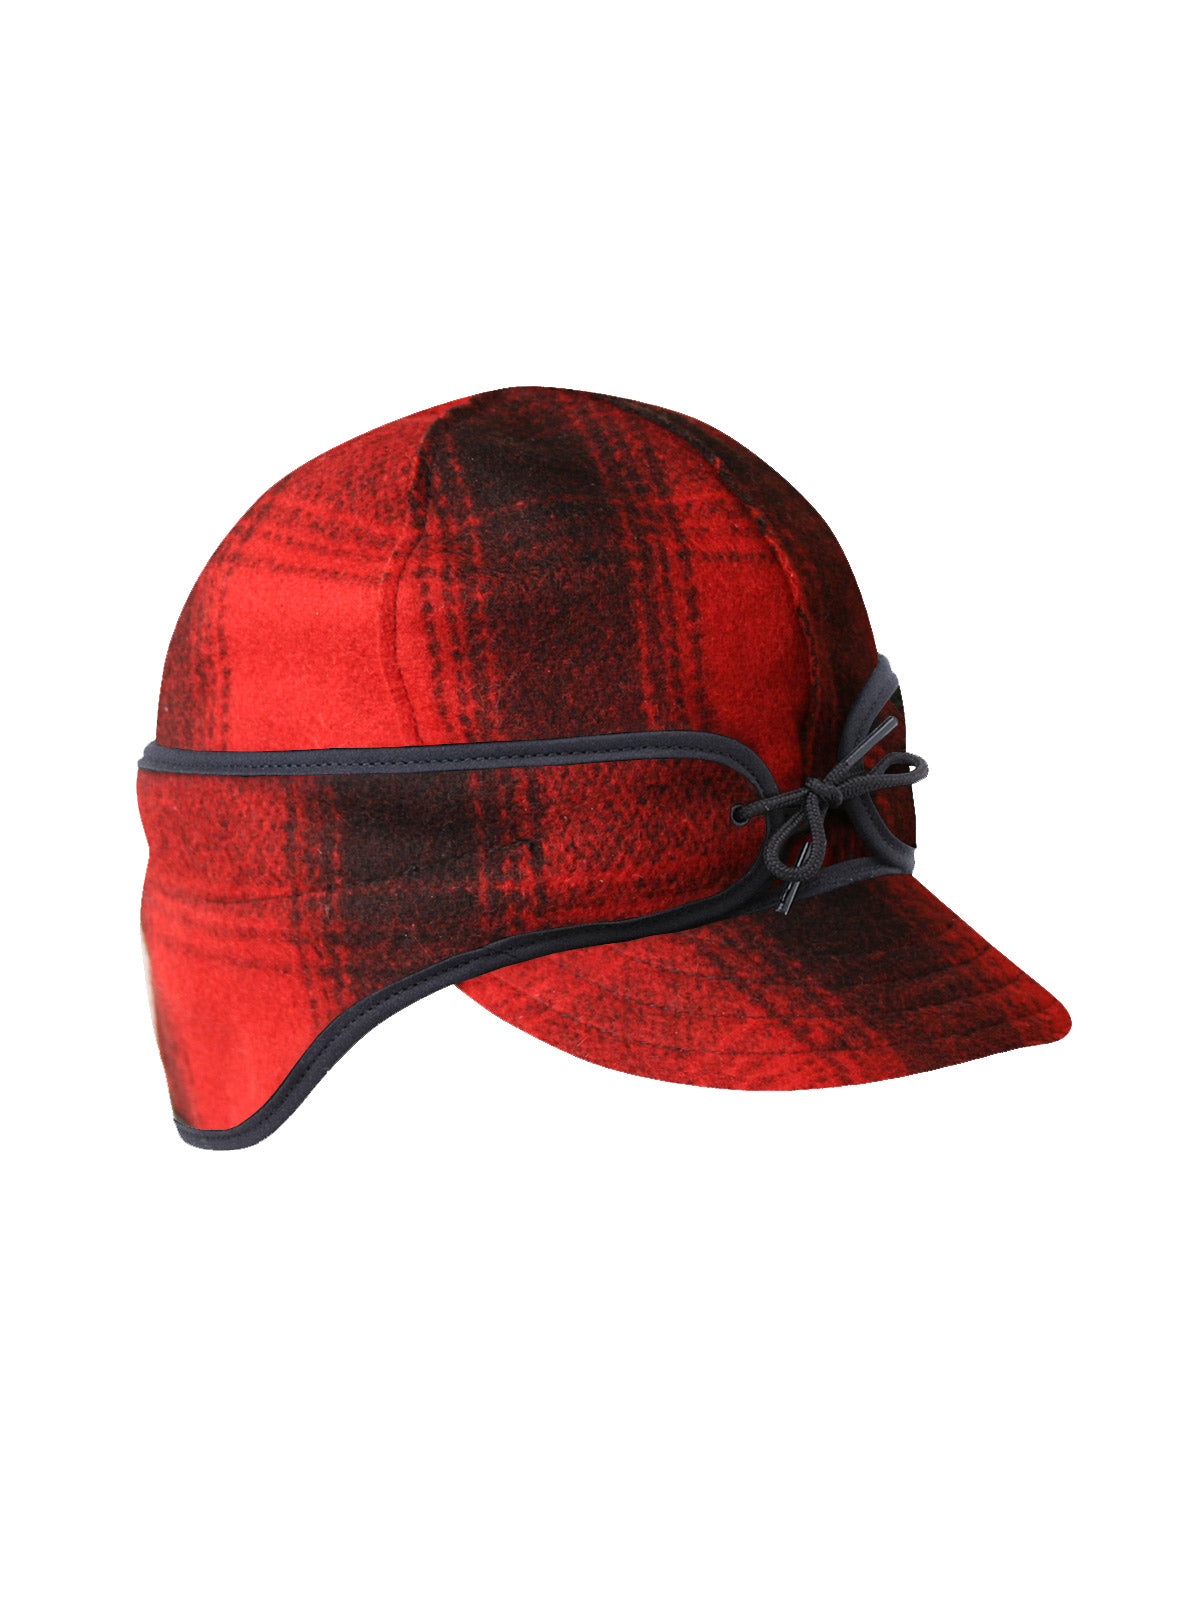 Stormy Kromer Rancher Caps With Ear Band in Black / Red Plaid - 50500-BRD